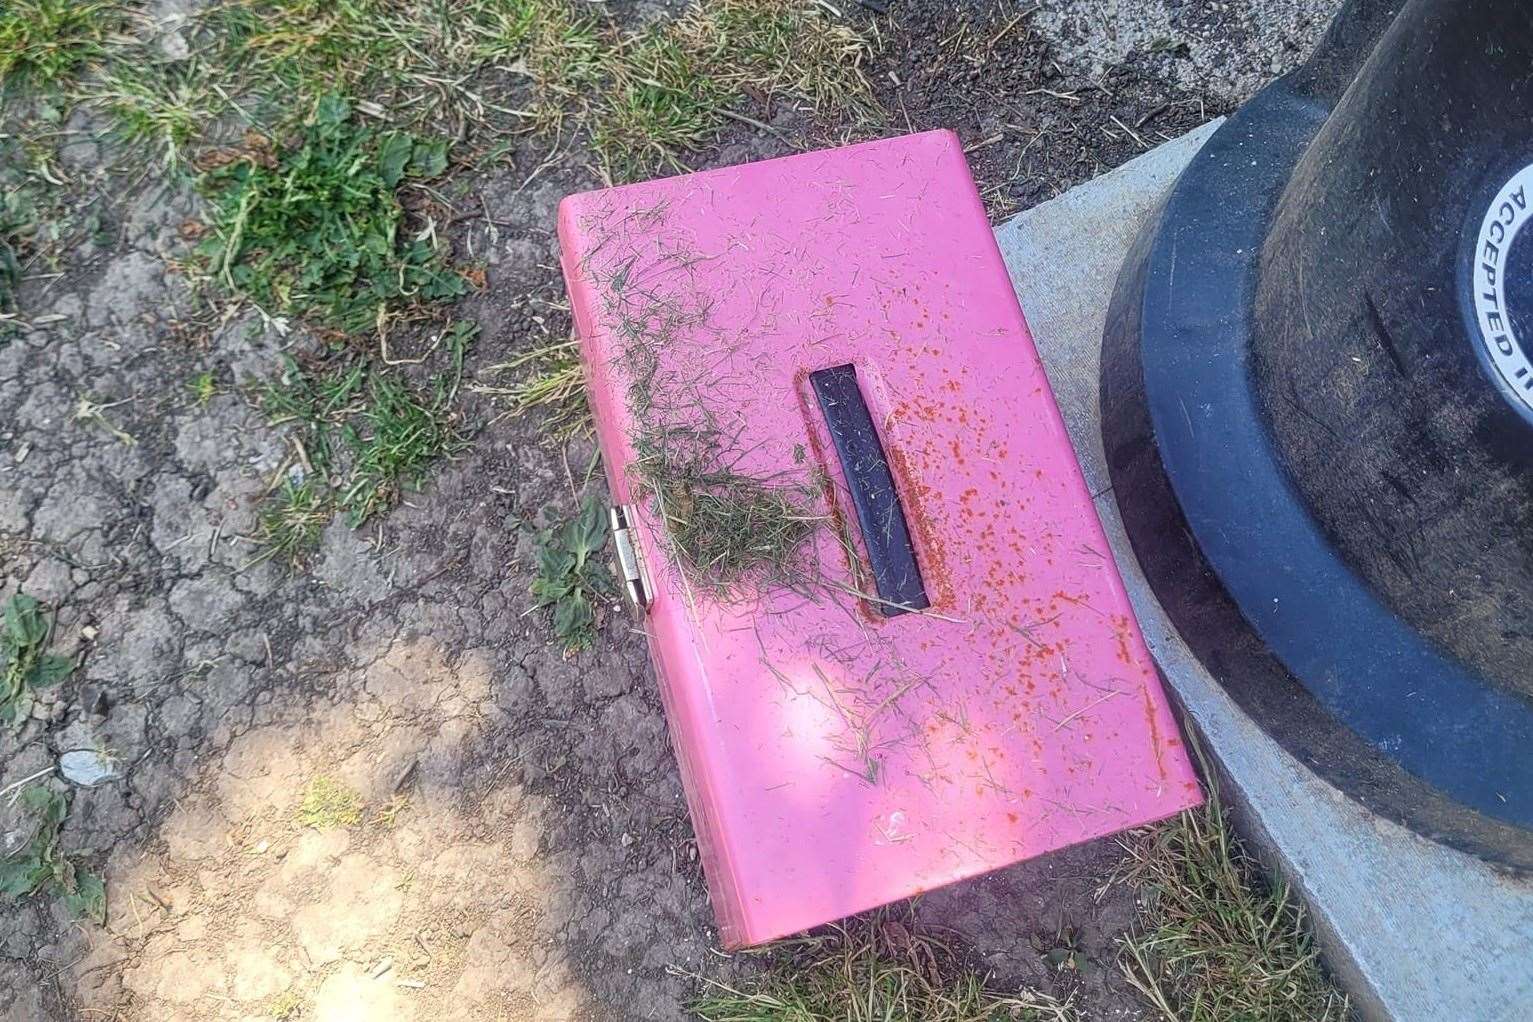 A Cats Protection volunteer believes a rabbit was placed in this pink after it had died